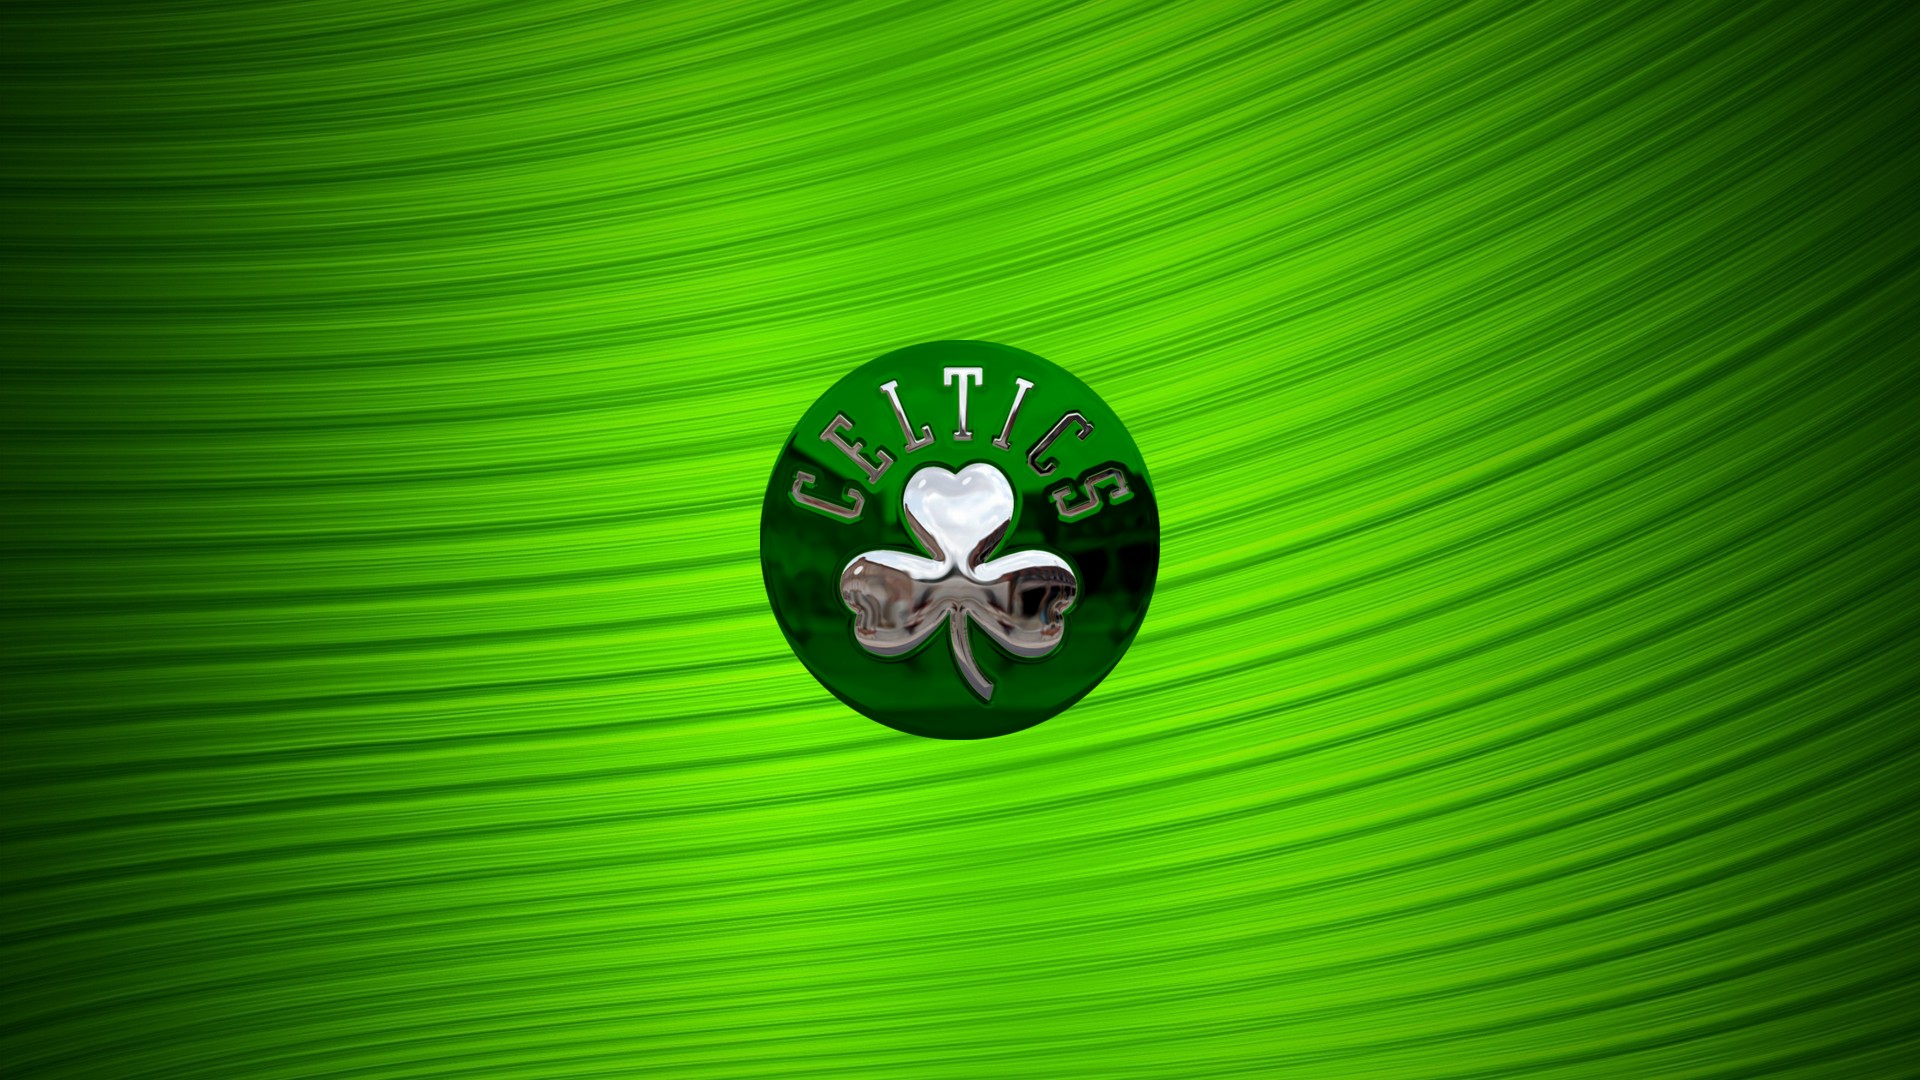 Wallpapers HD Boston Celtics Logo with image dimensions 1920x1080 pixel. You can make this wallpaper for your Desktop Computer Backgrounds, Windows or Mac Screensavers, iPhone Lock screen, Tablet or Android and another Mobile Phone device